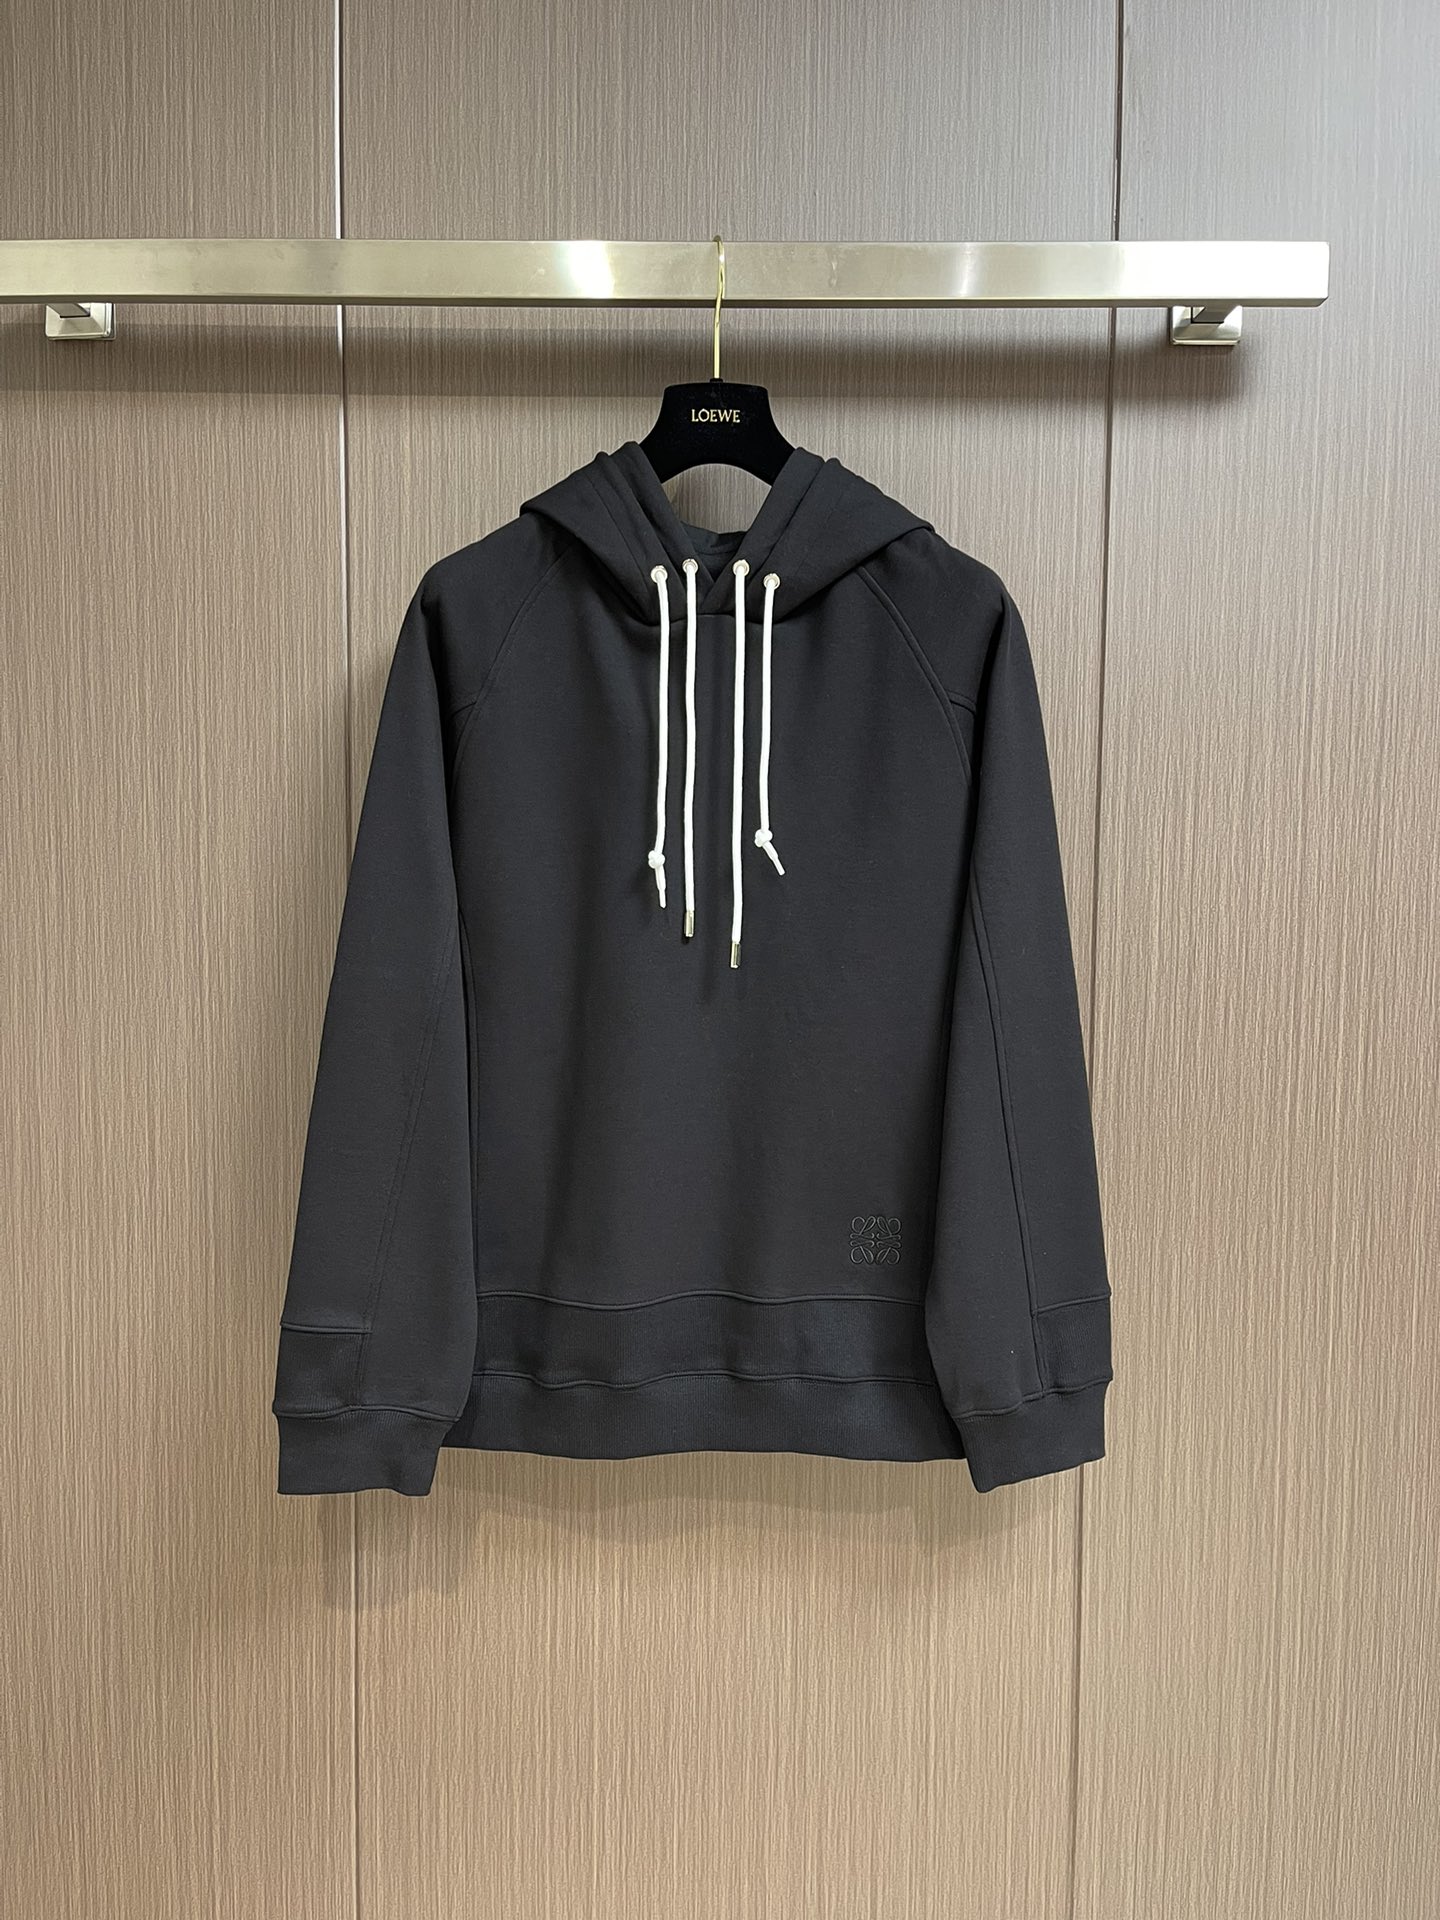 Loewe Clothing Coats & Jackets Hoodies Combed Cotton Knitting Fall/Winter Collection Hooded Top